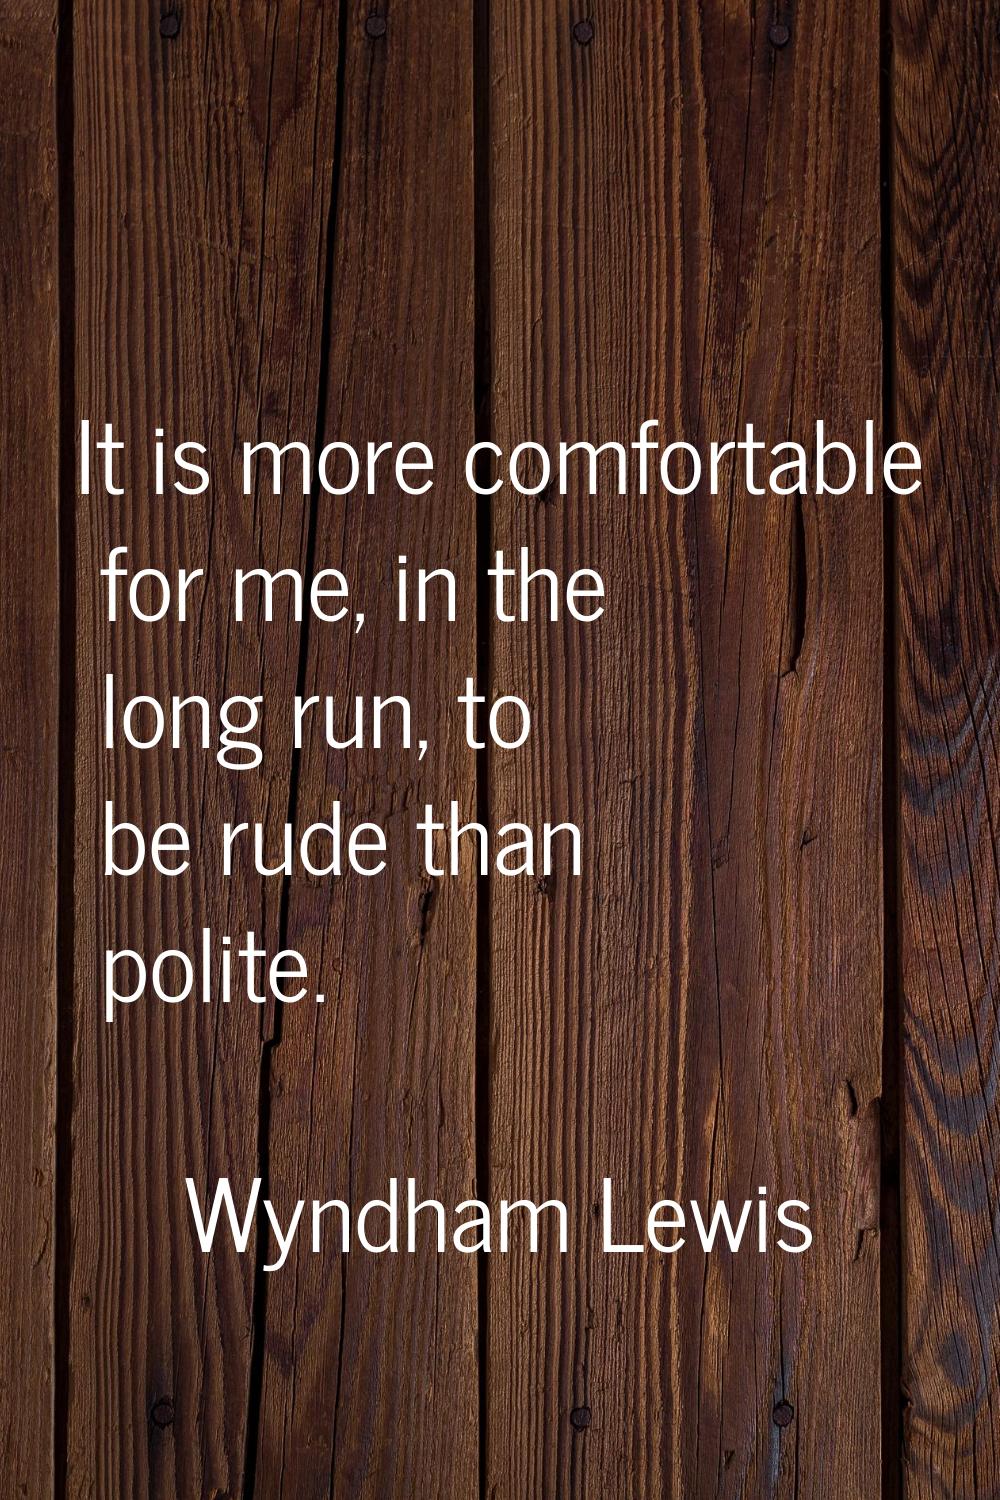 It is more comfortable for me, in the long run, to be rude than polite.